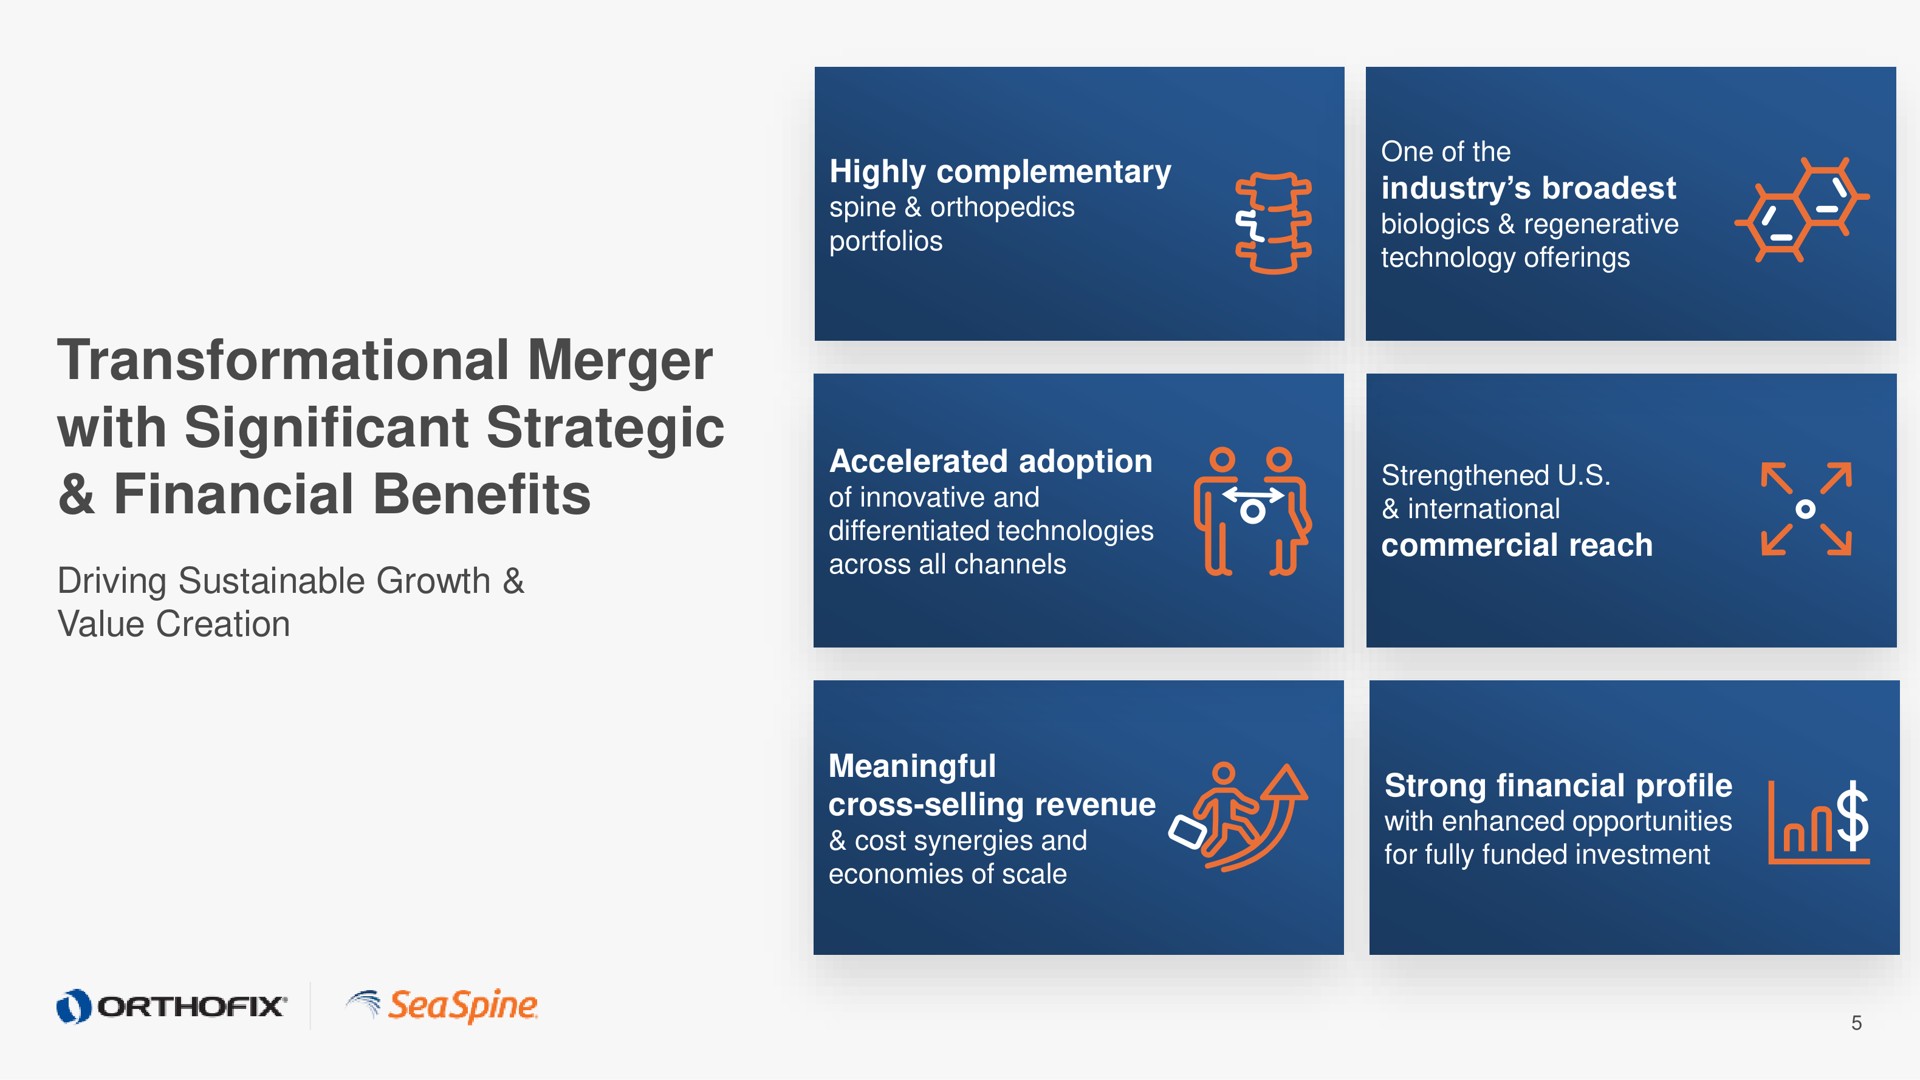 merger with significant strategic financial benefits | Orthofix